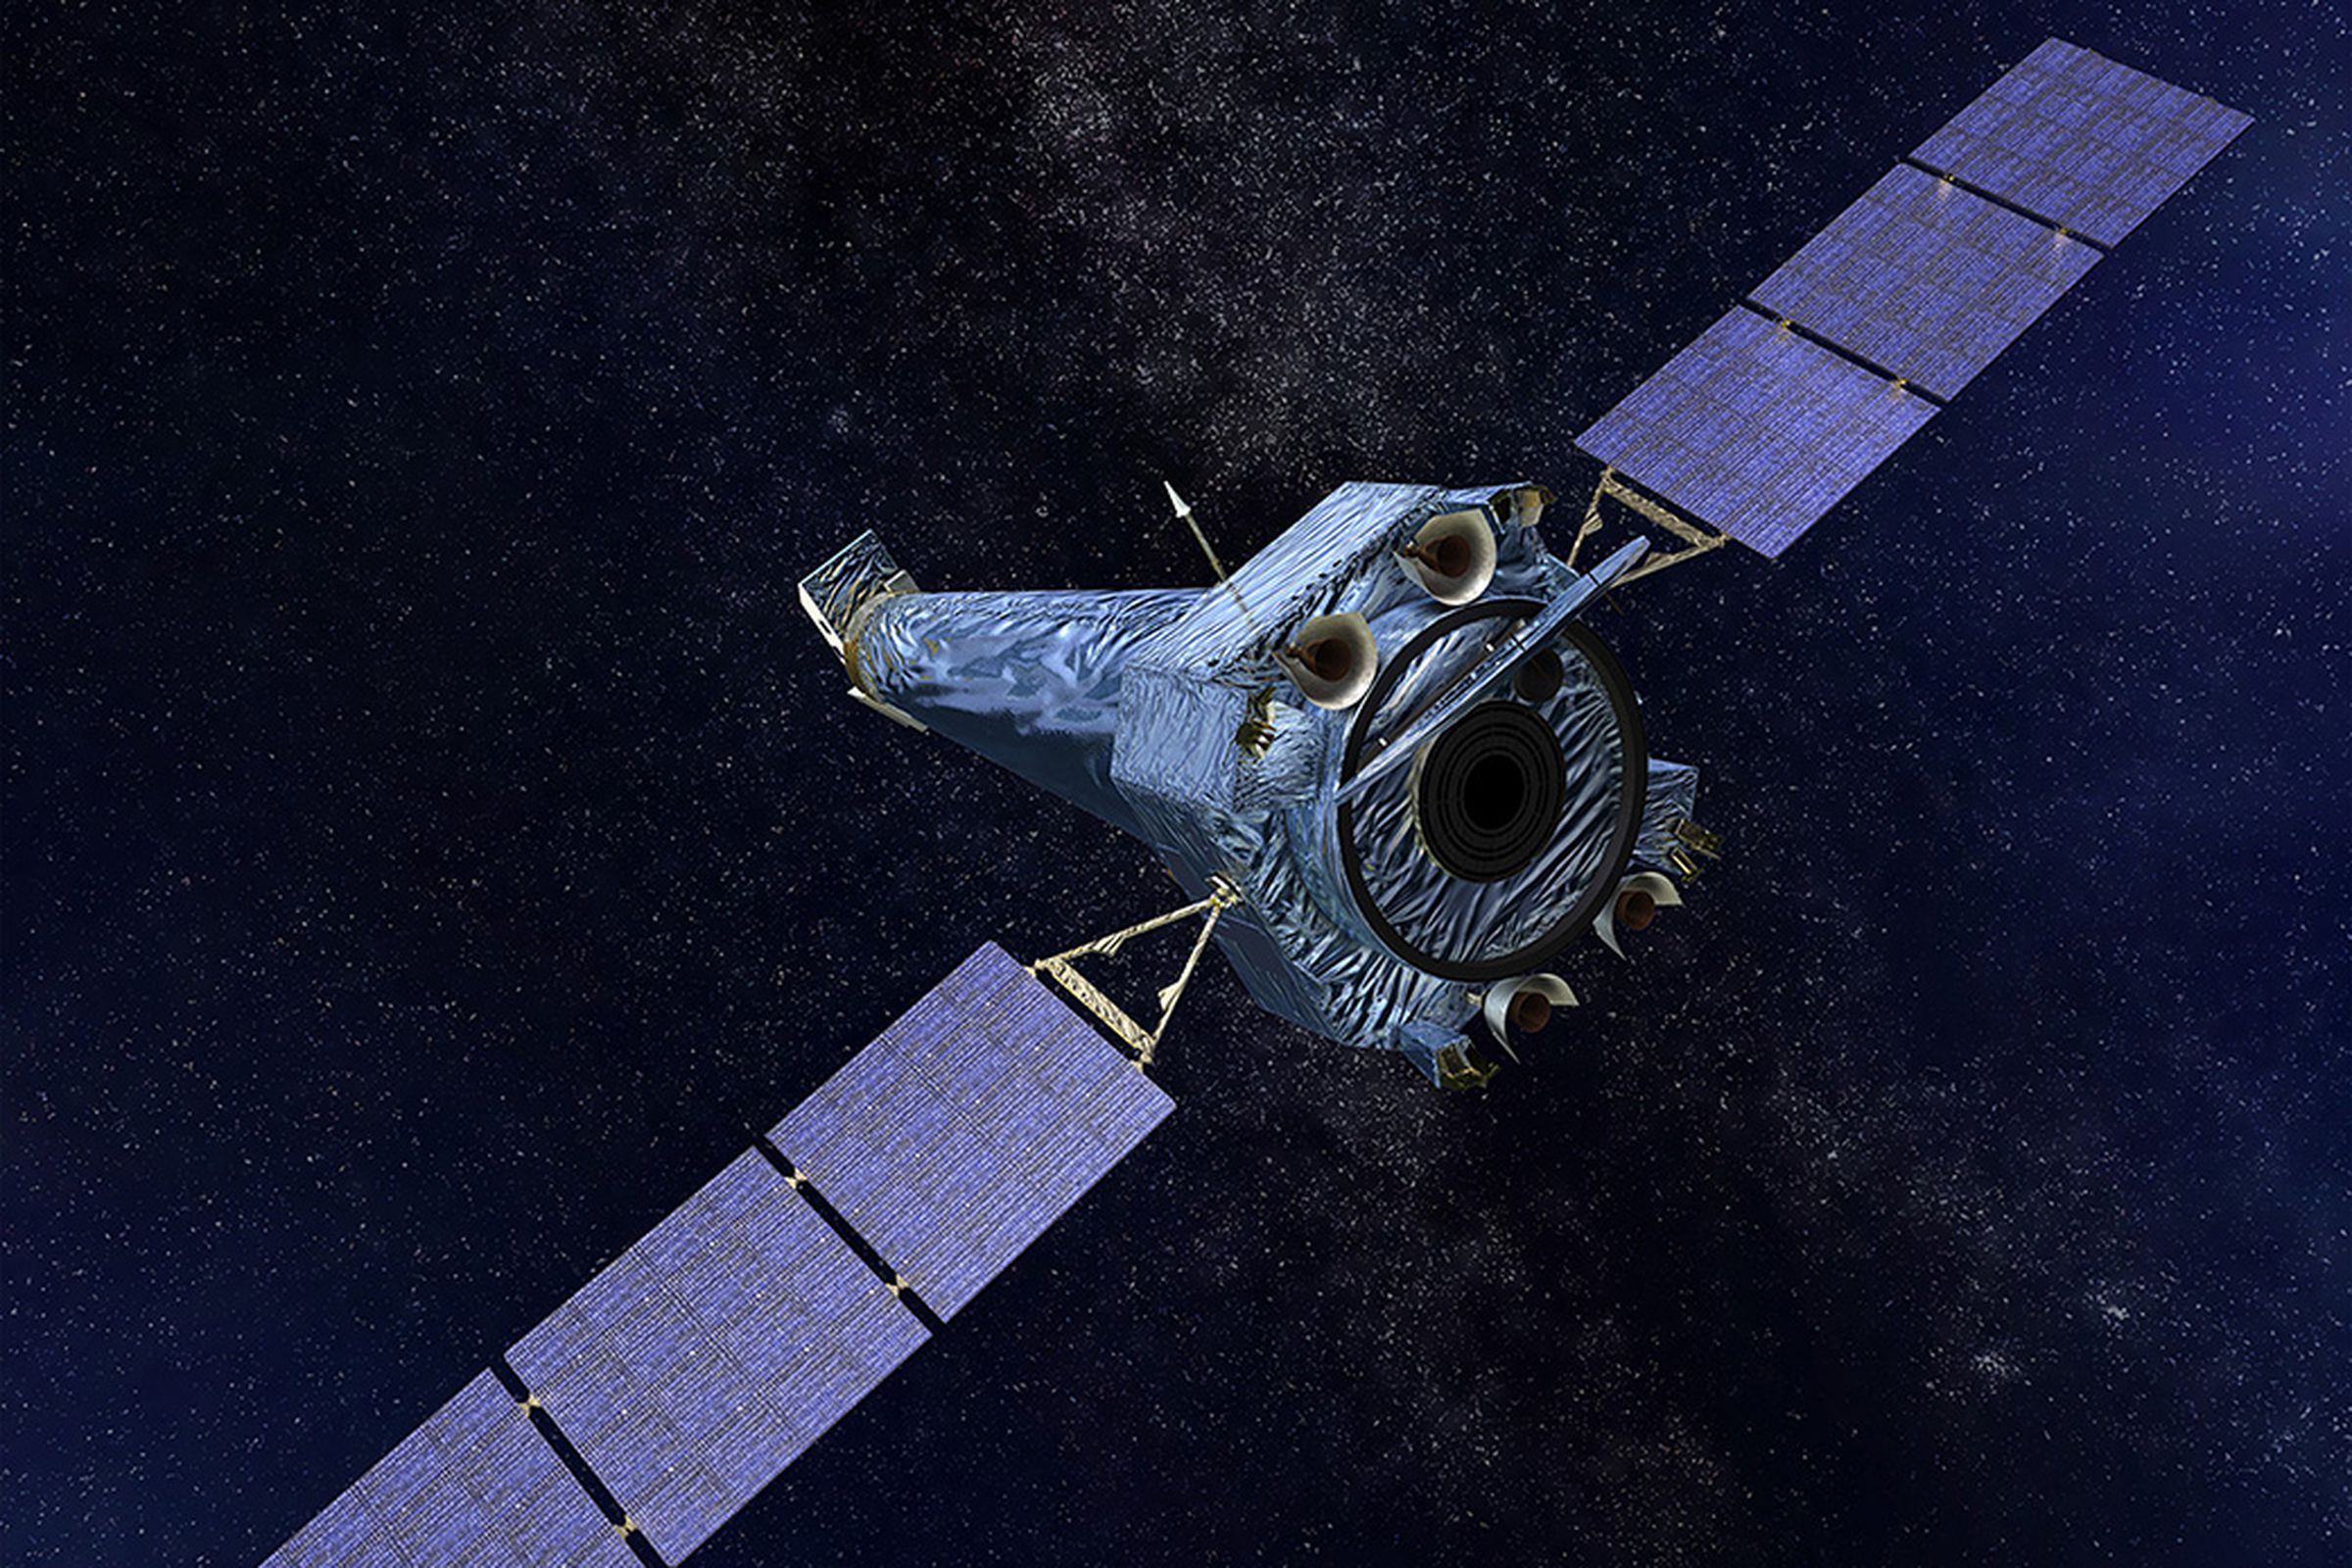 An artistic rendering of the Chandra X-ray Observatory in orbit.